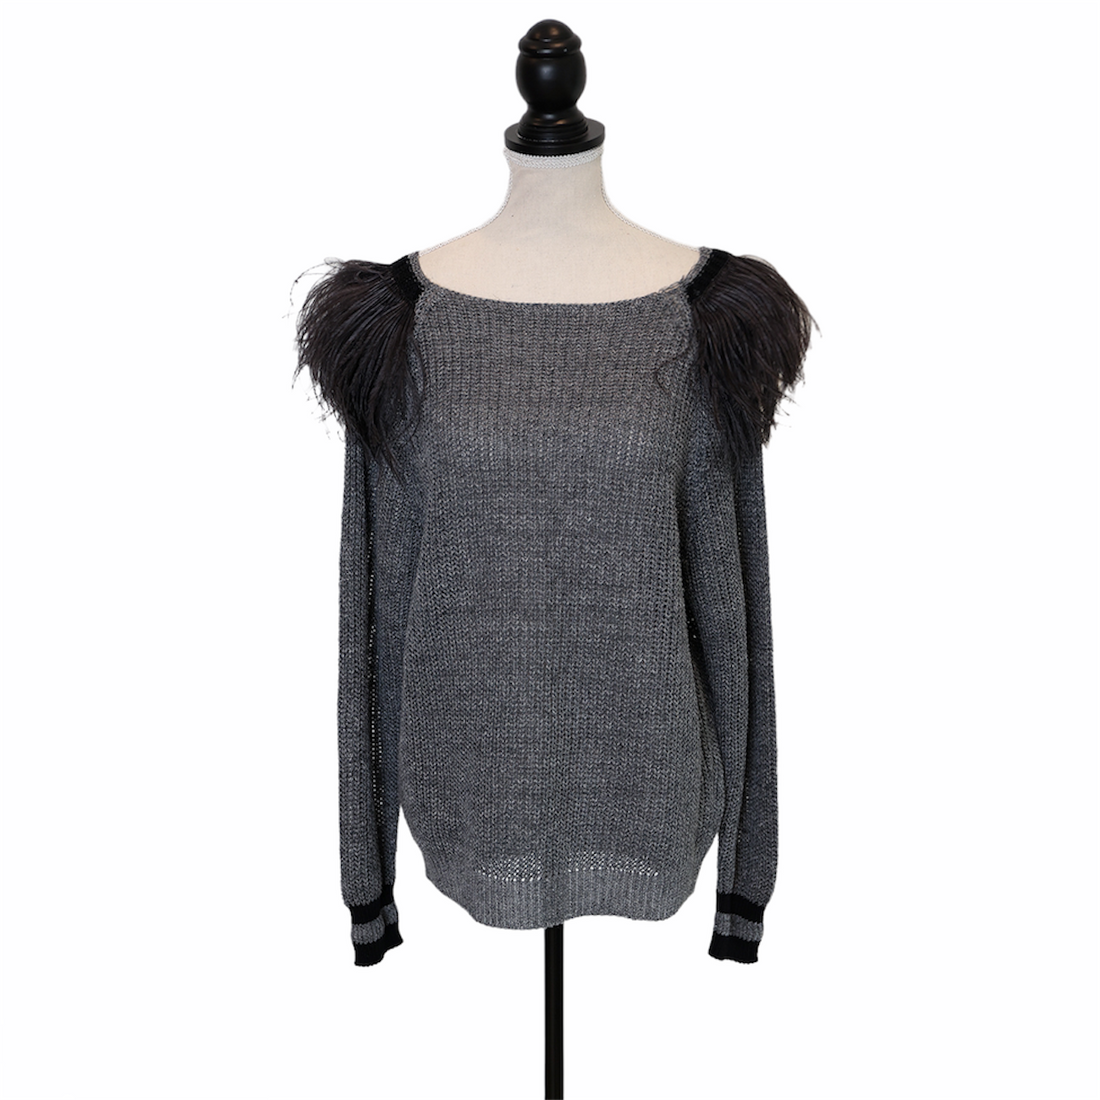 Brunello Cucinelli sweater with feather details